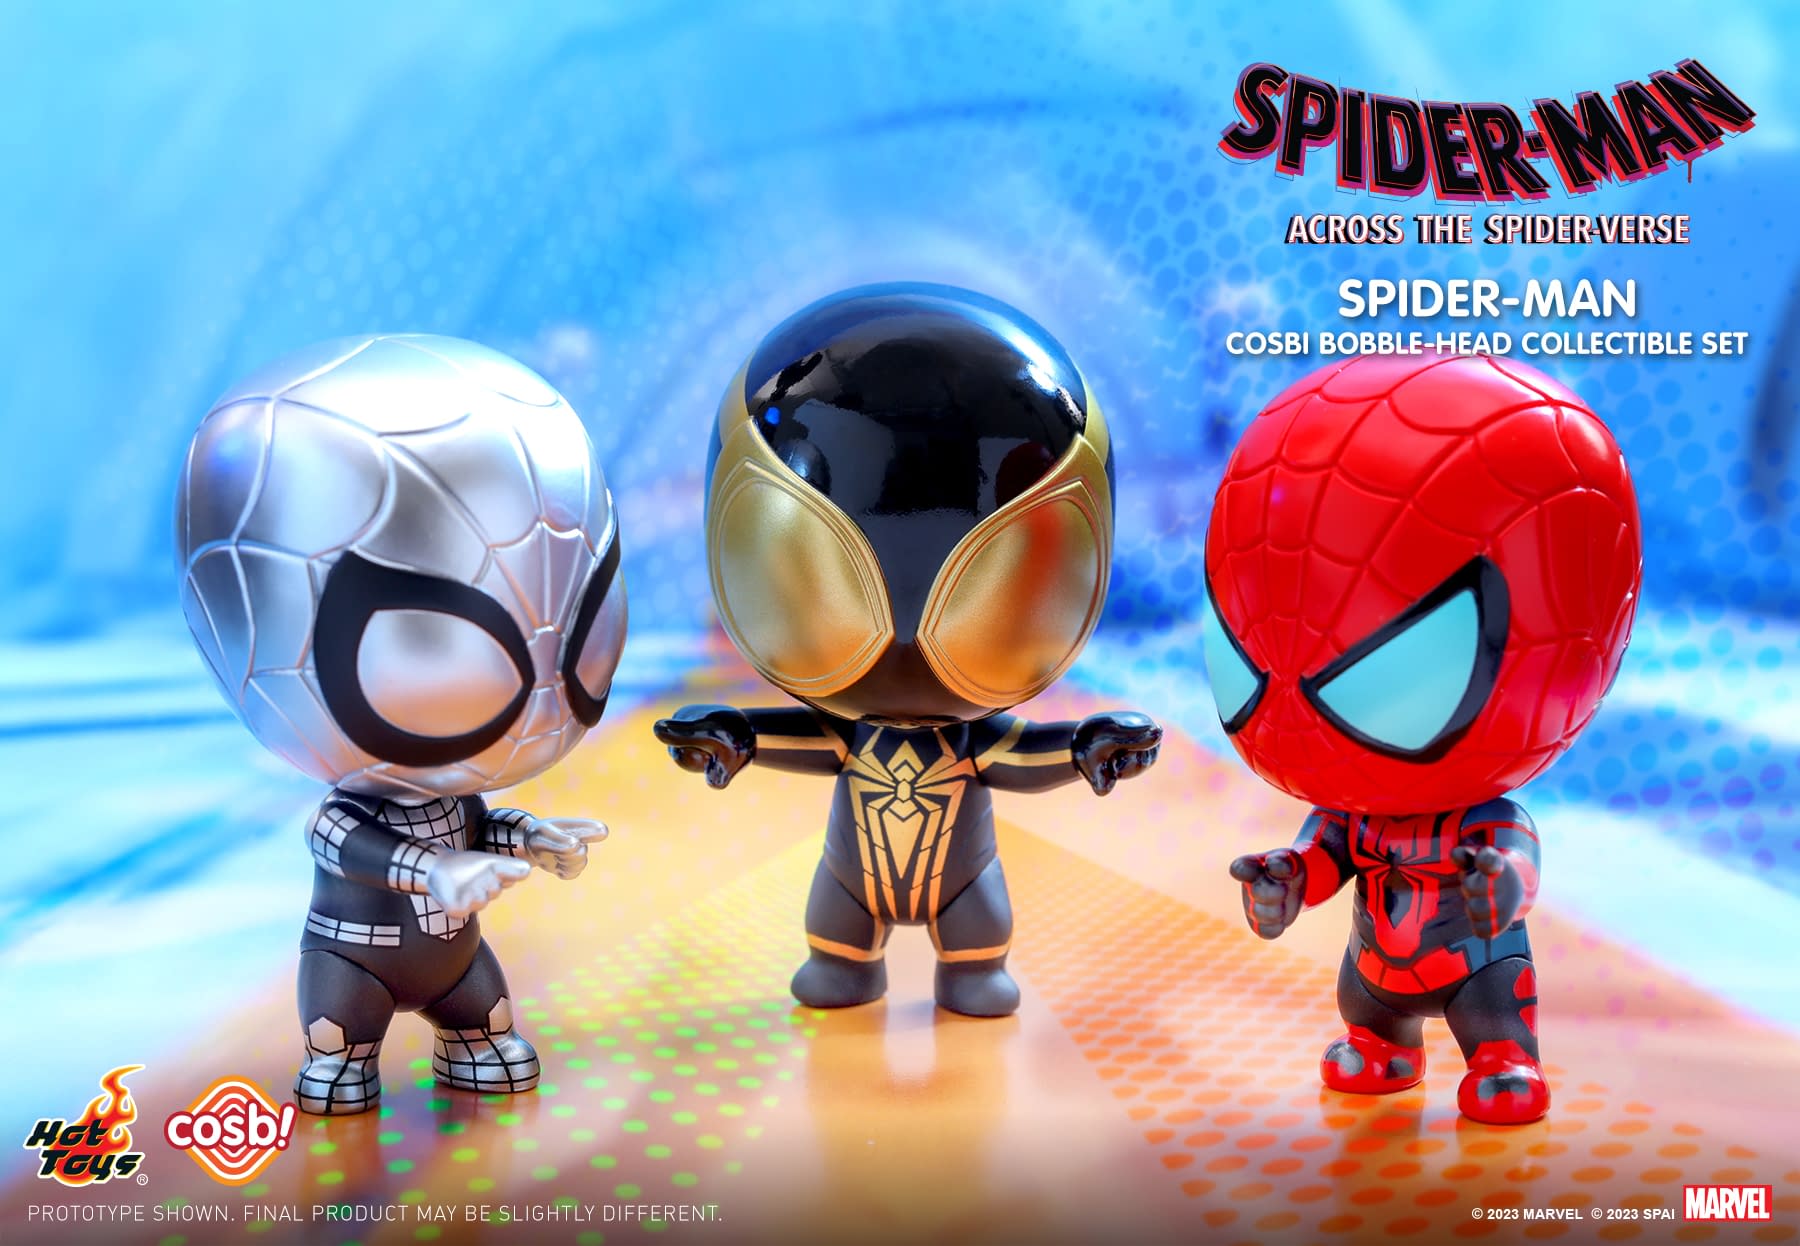 Enter the Spider Society with Hot Toys Newest Spider-Man Cosbi Set8